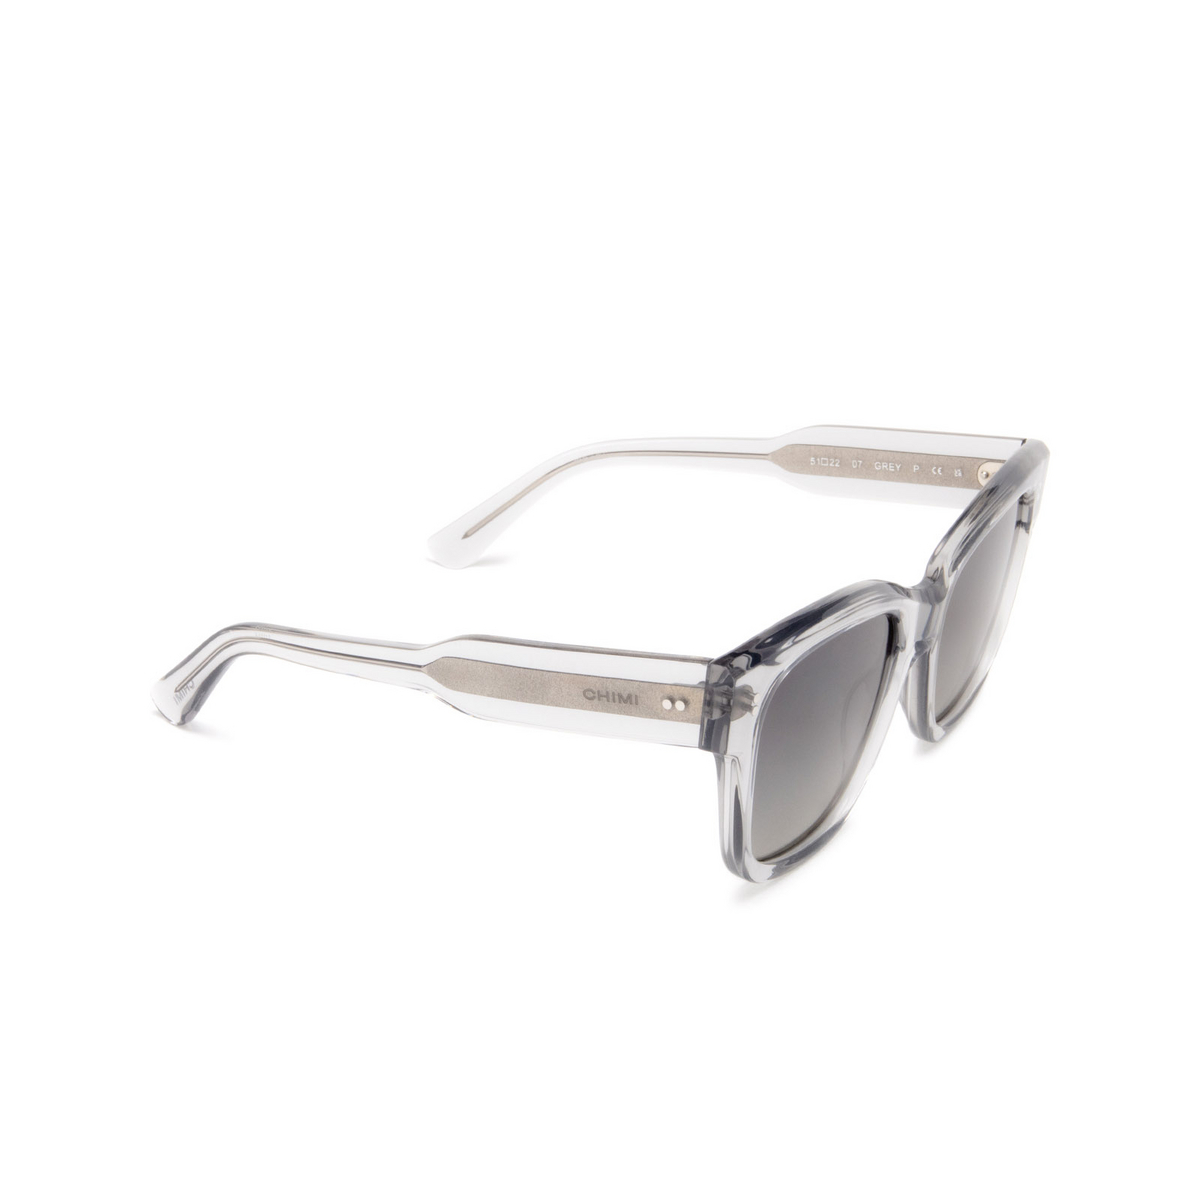 Chimi® Butterfly Sunglasses: 07 color Grey - three-quarters view